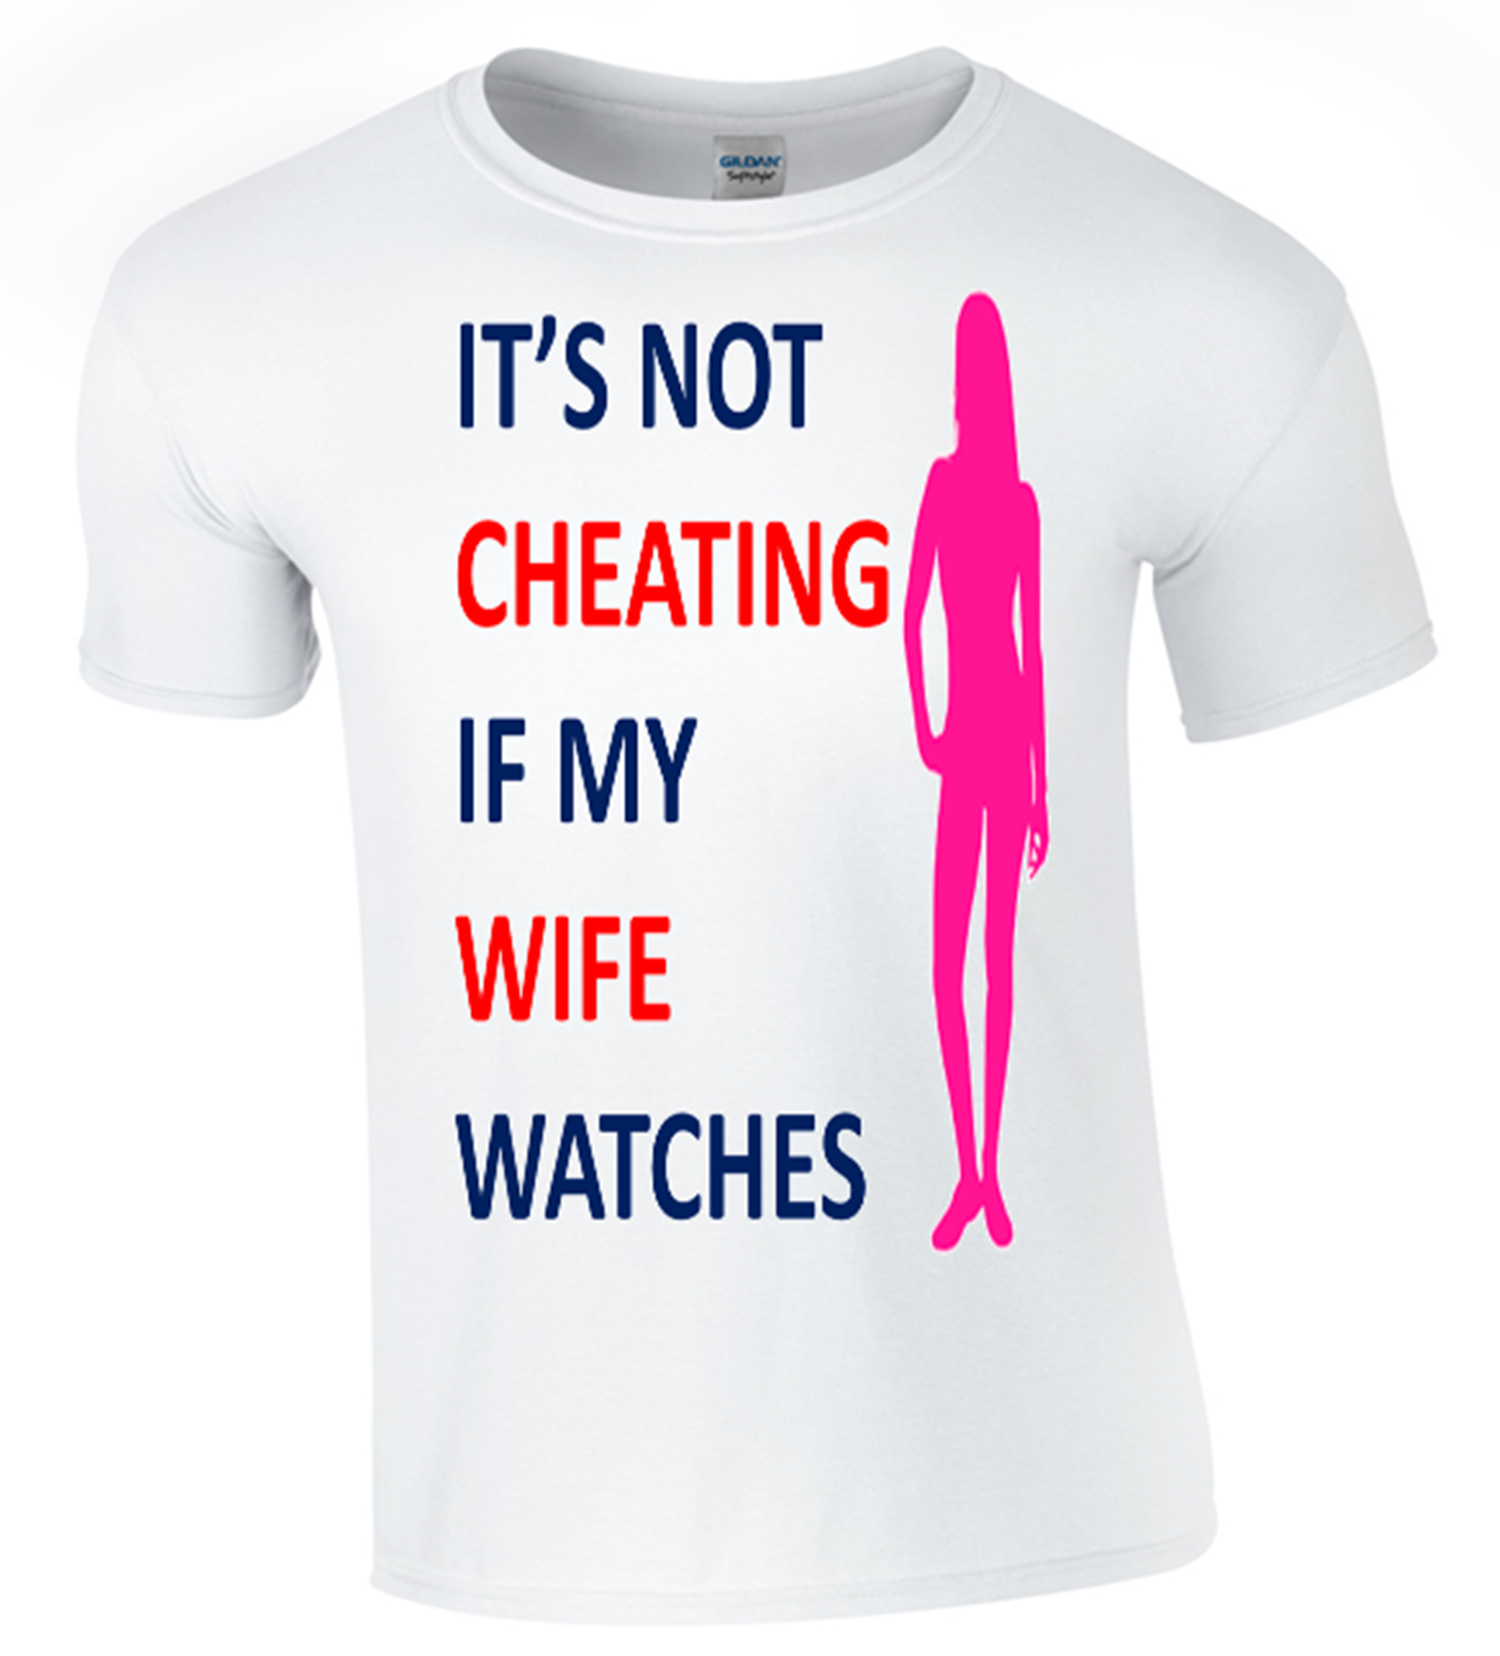 IT’S NOT CHEATING IF MY ??????? WATCHES - Army 1157 kit S / WIFE Army 1157 Kit Veterans Owned Business